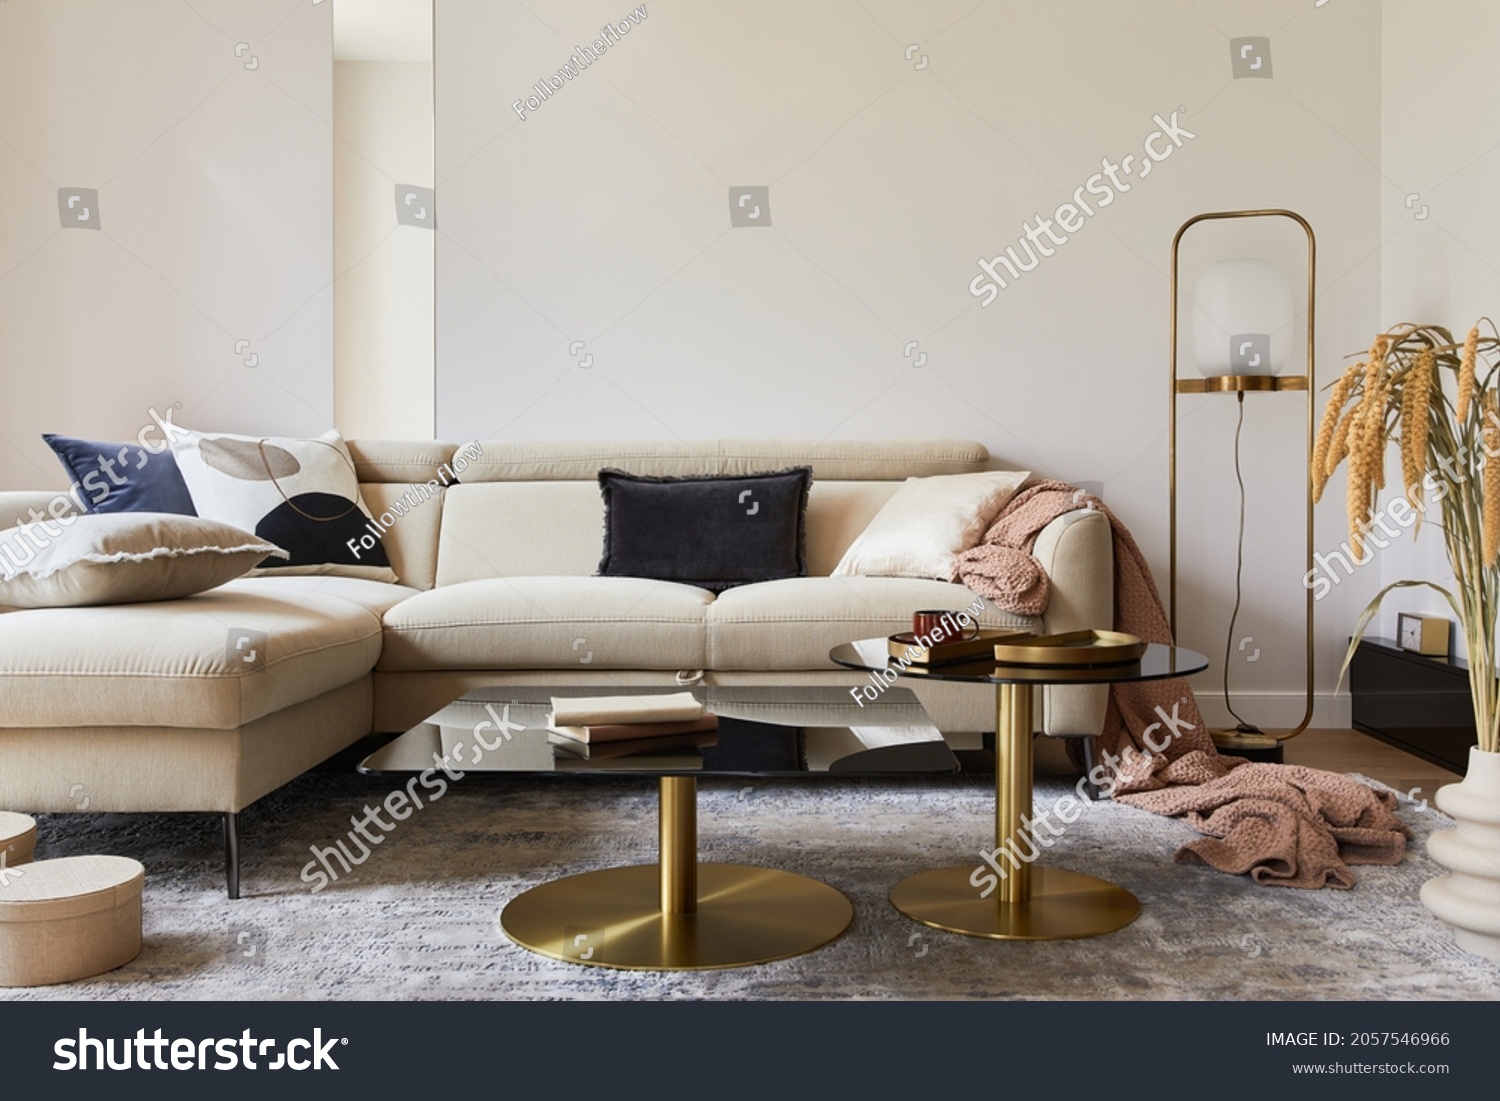 Creative living room interior composition with beige sofa, glass coffee table, carpet on the floor and glamorous accessories. Template.
 #2057546966